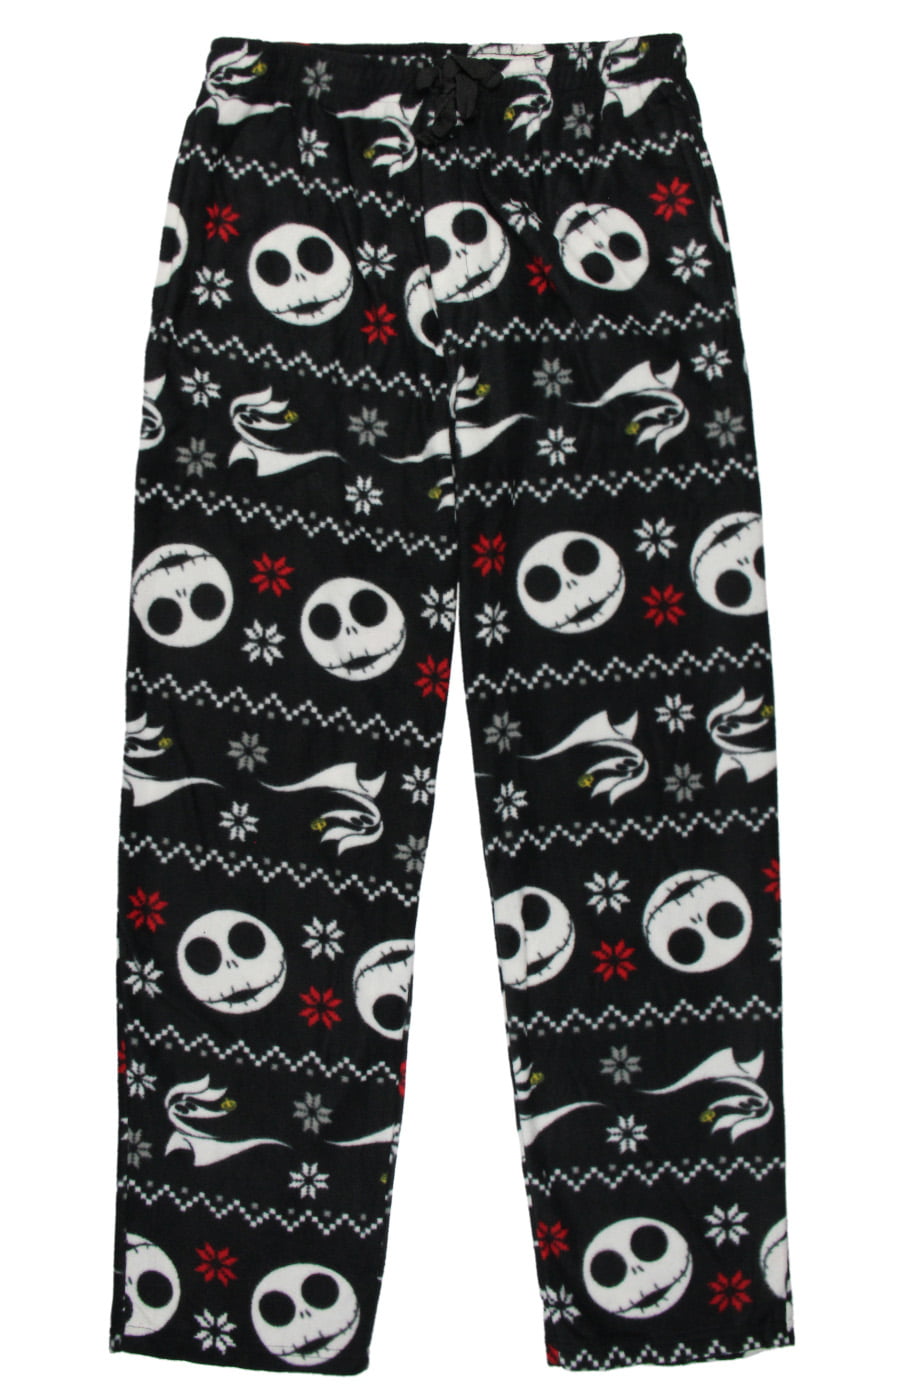 Details about   The Nightmare Before Christmas Size SMALL Mens Pajamas Set Jack Skellington NEW 